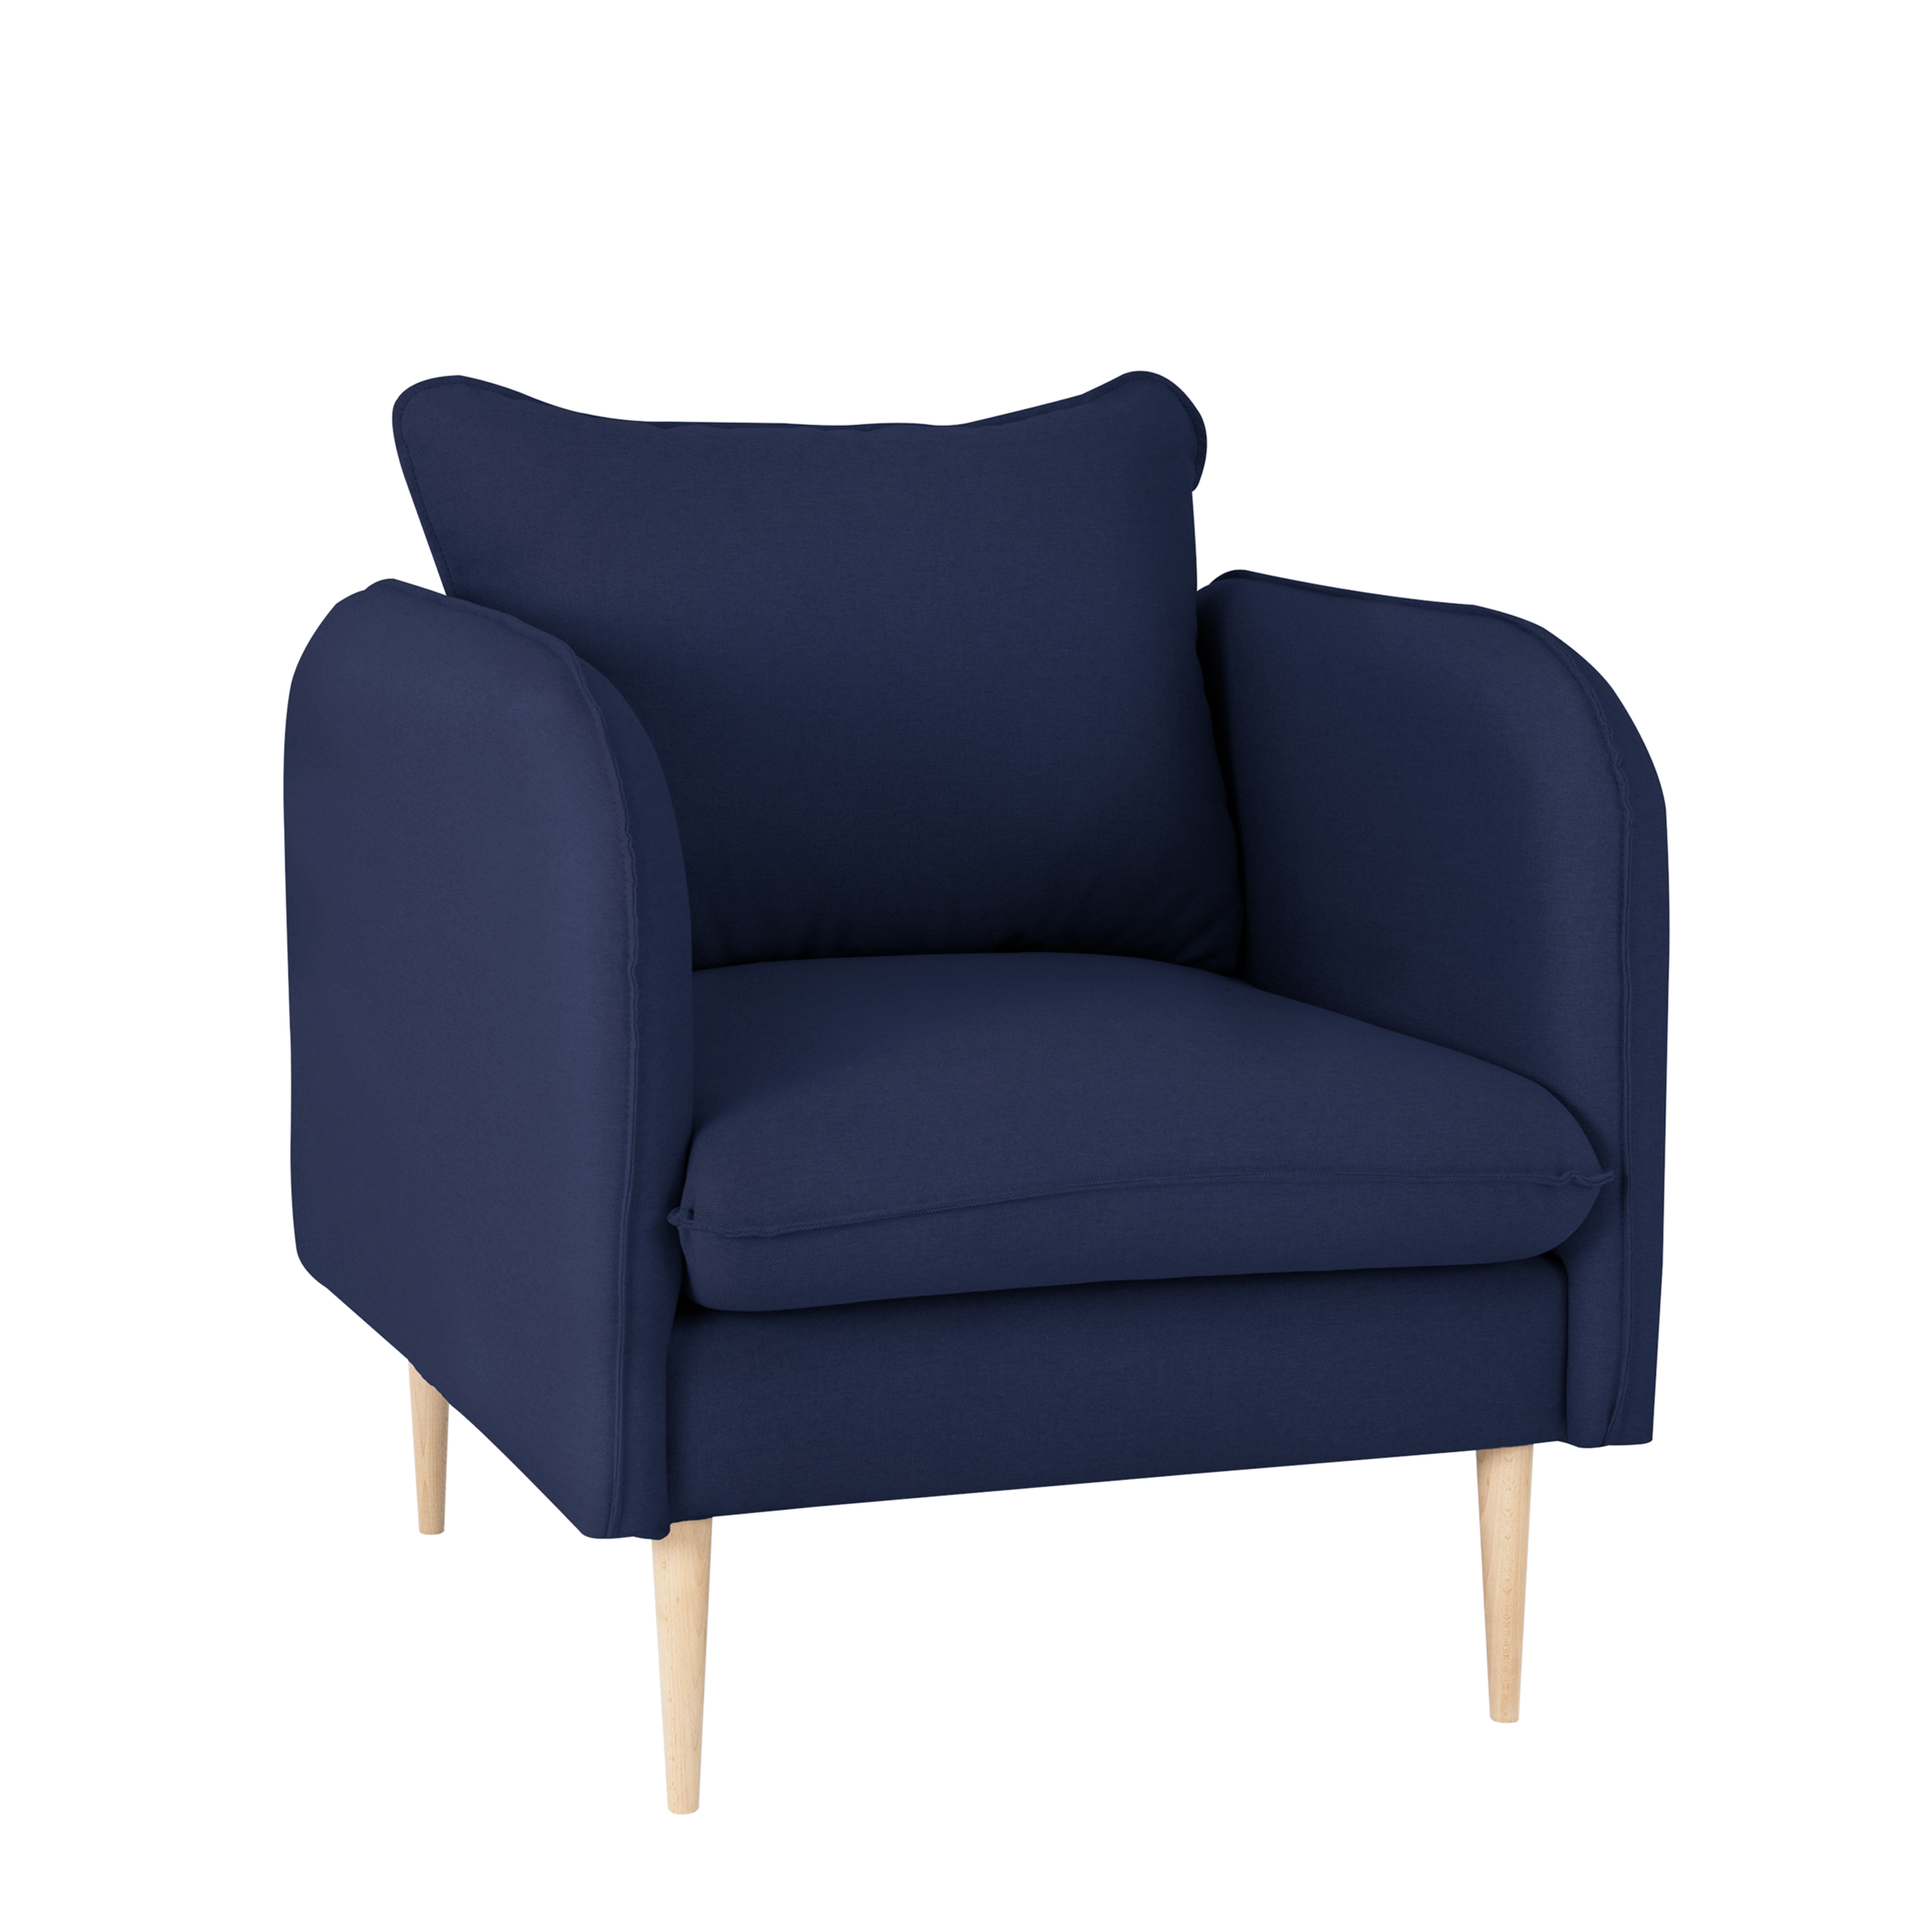 POSH Armchair upholstery colour blue-white background